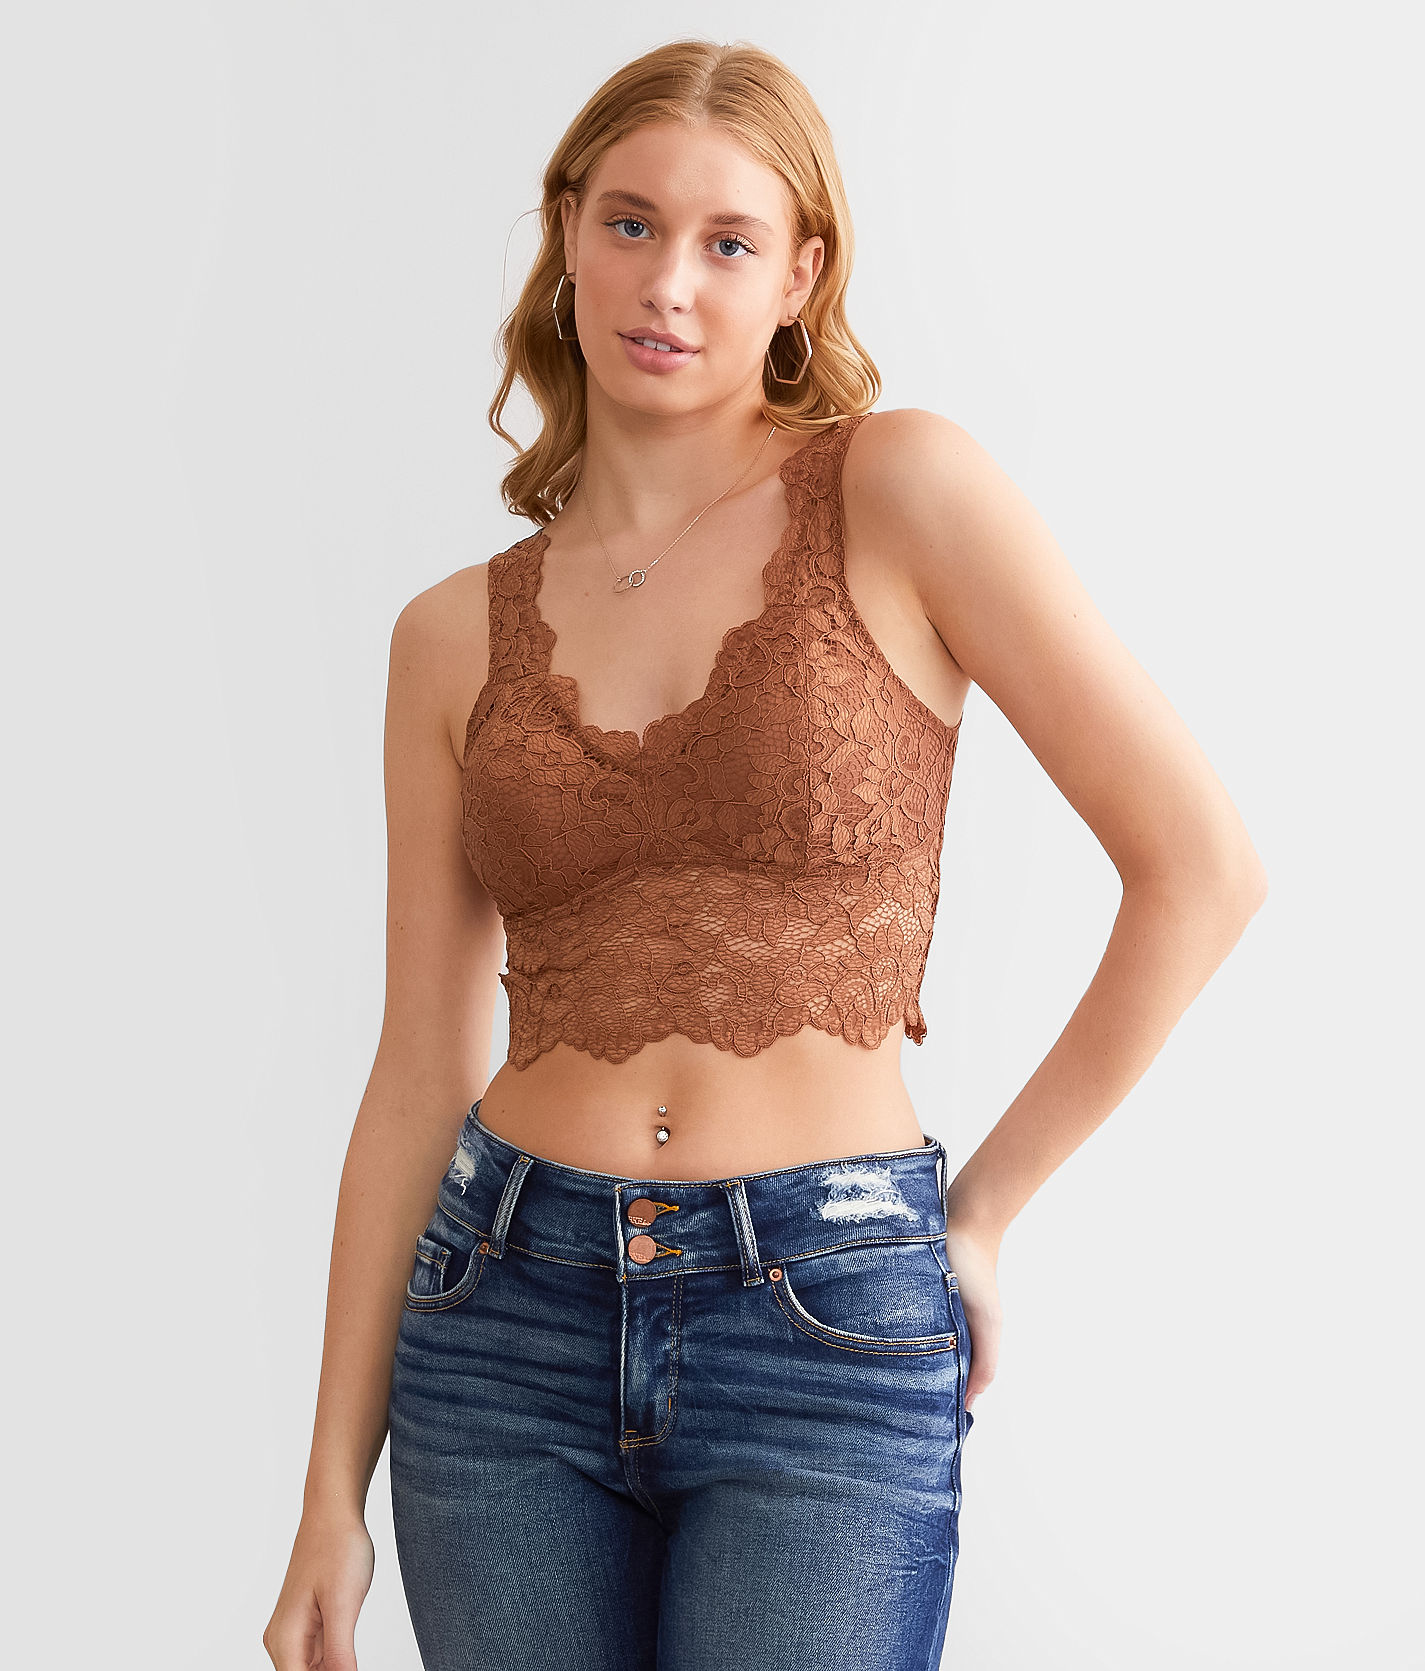 BKEssentials Floral Lace Full Coverage Bralette - Women's Bandeaus/Bralettes  in Cream